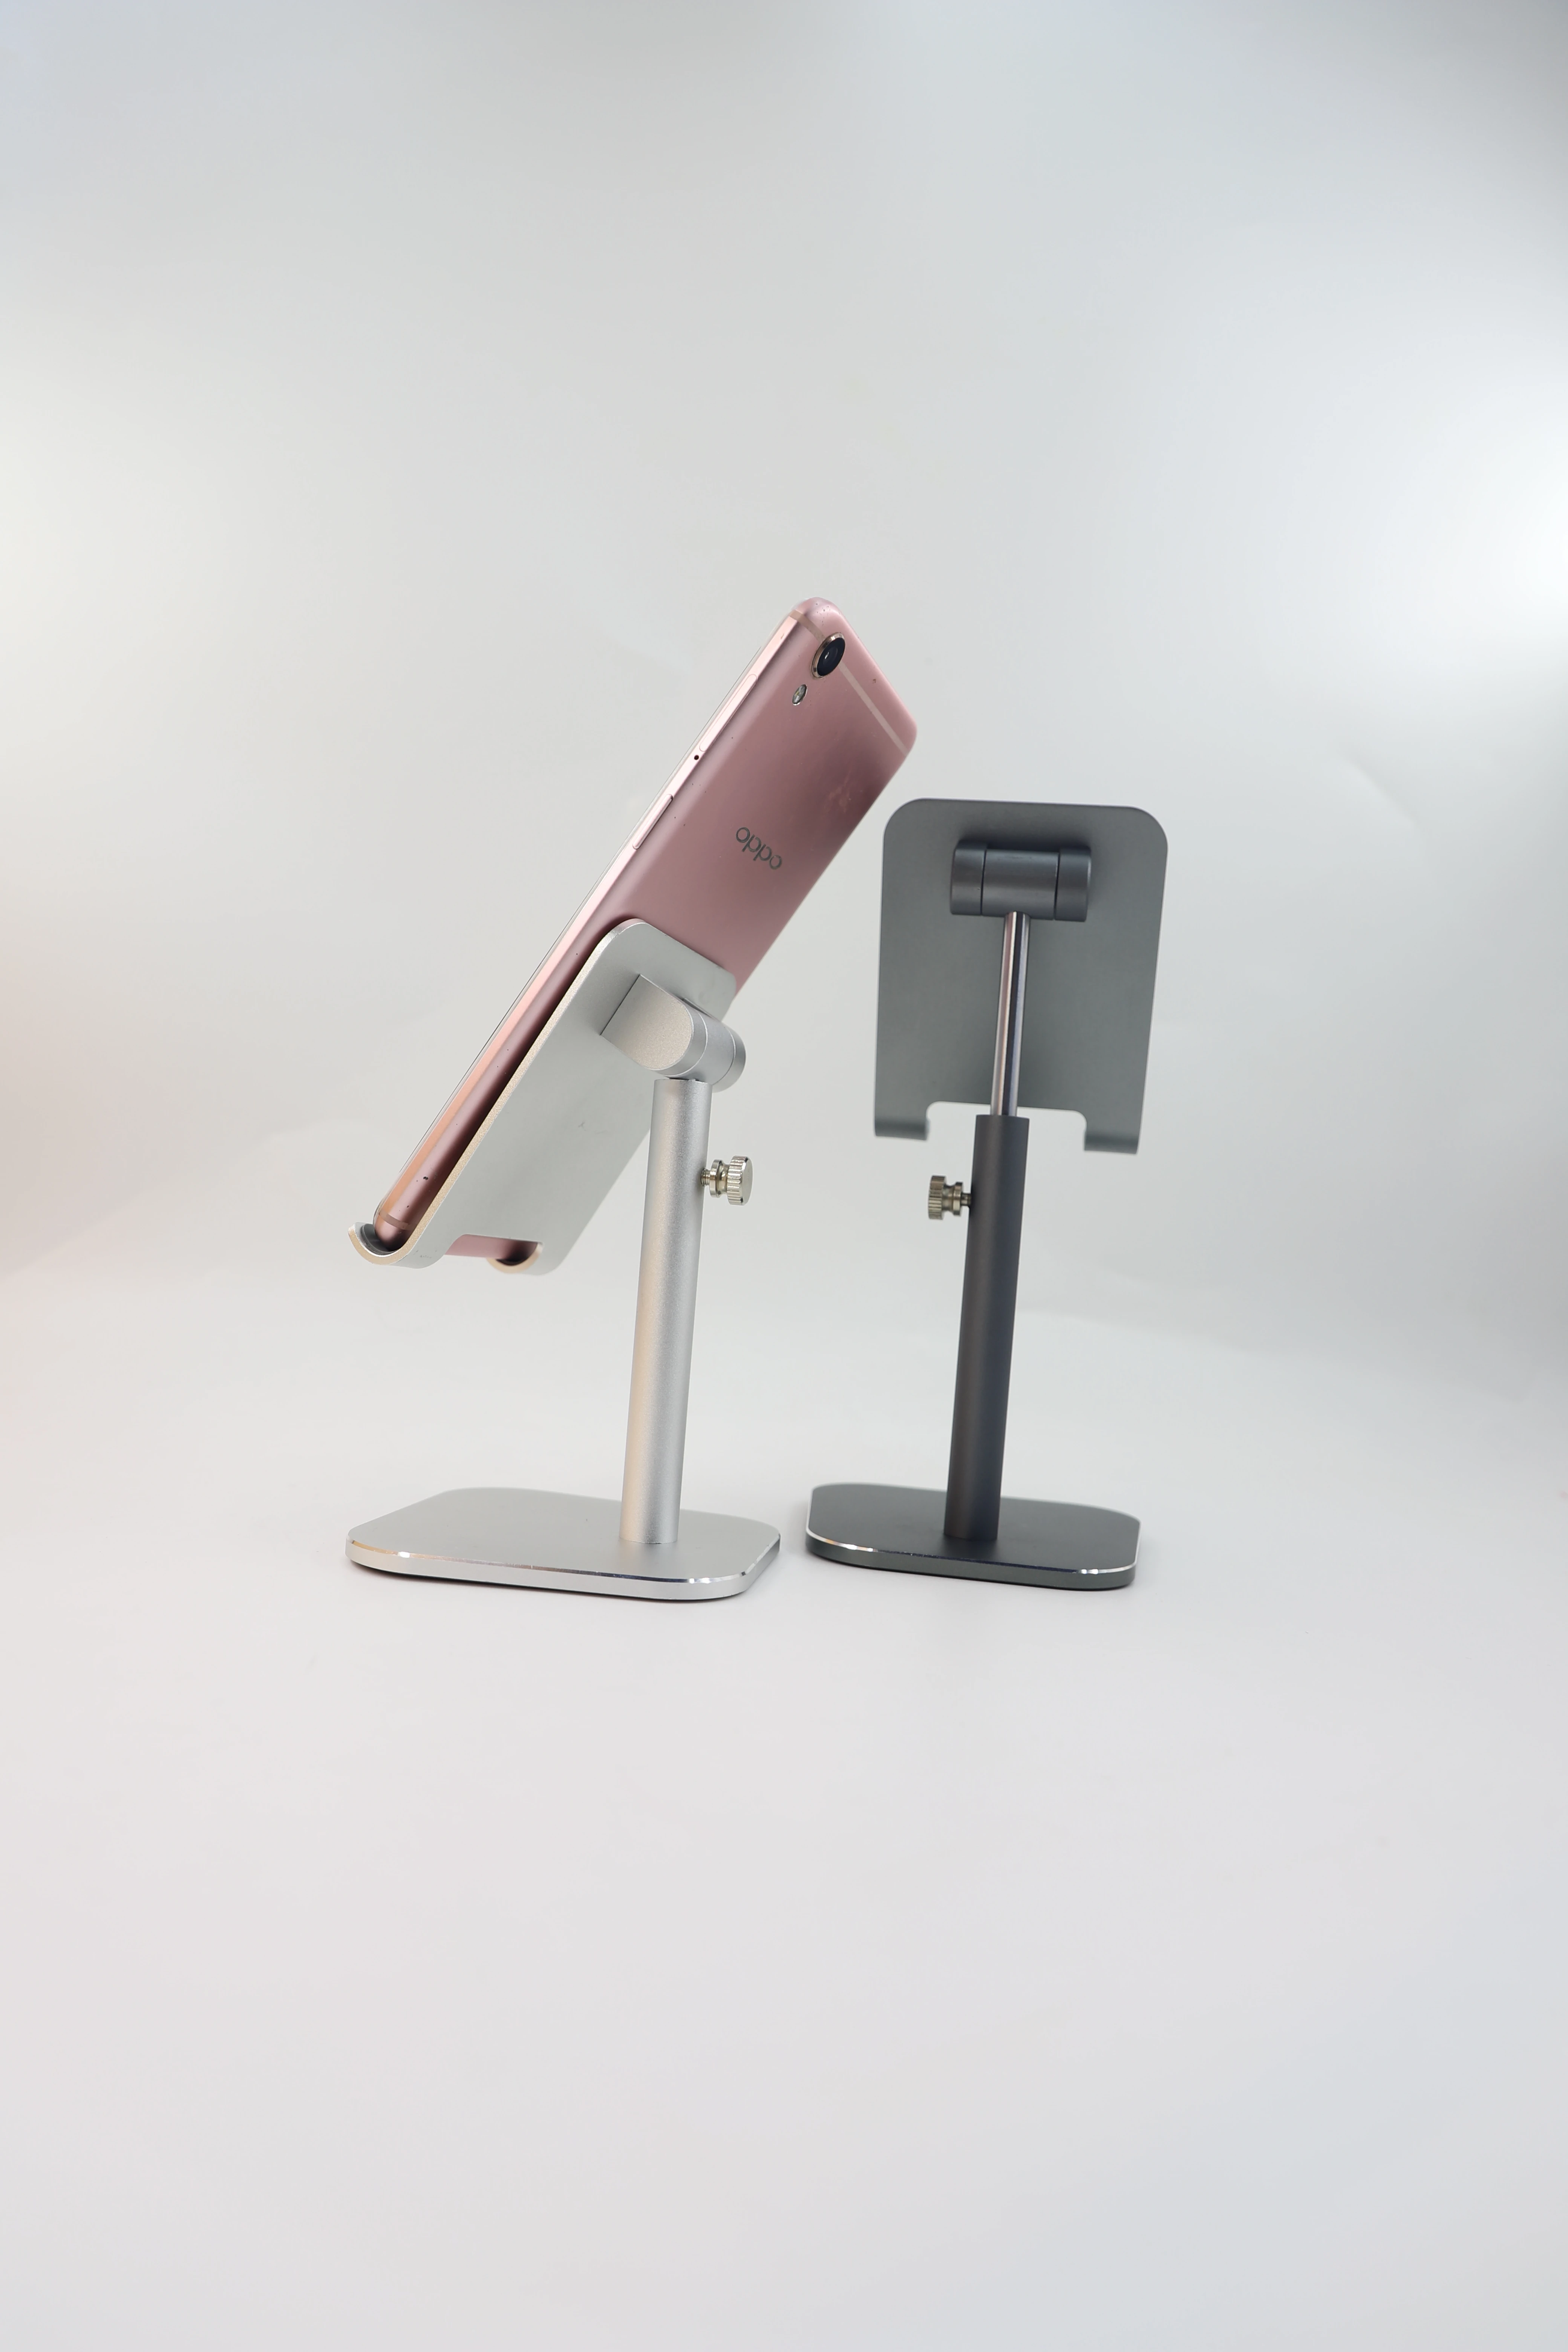 Universal Angle Adjustable Telescopic Mobile Phone Desktop Stand Aluminum Alloy Tablet Cell Phone Stand Holder Hot sale products